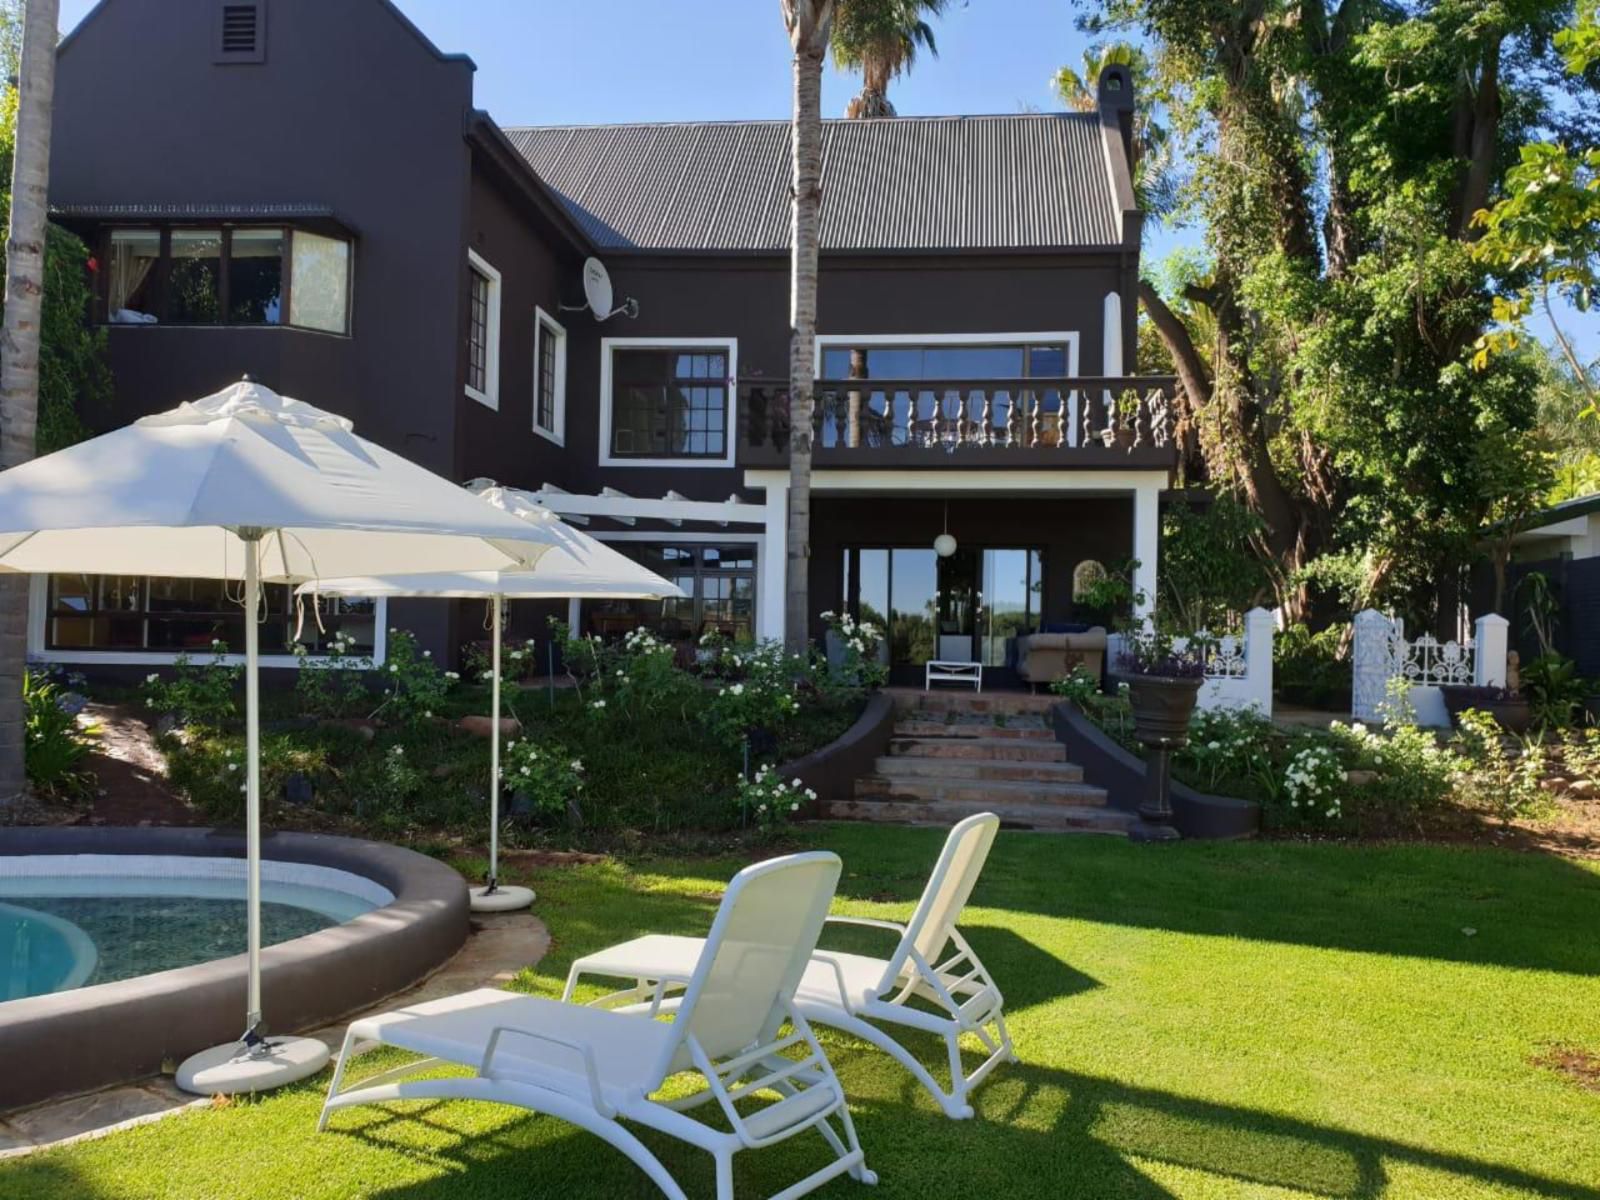 Le Must River Residence Upington Northern Cape South Africa House, Building, Architecture, Swimming Pool